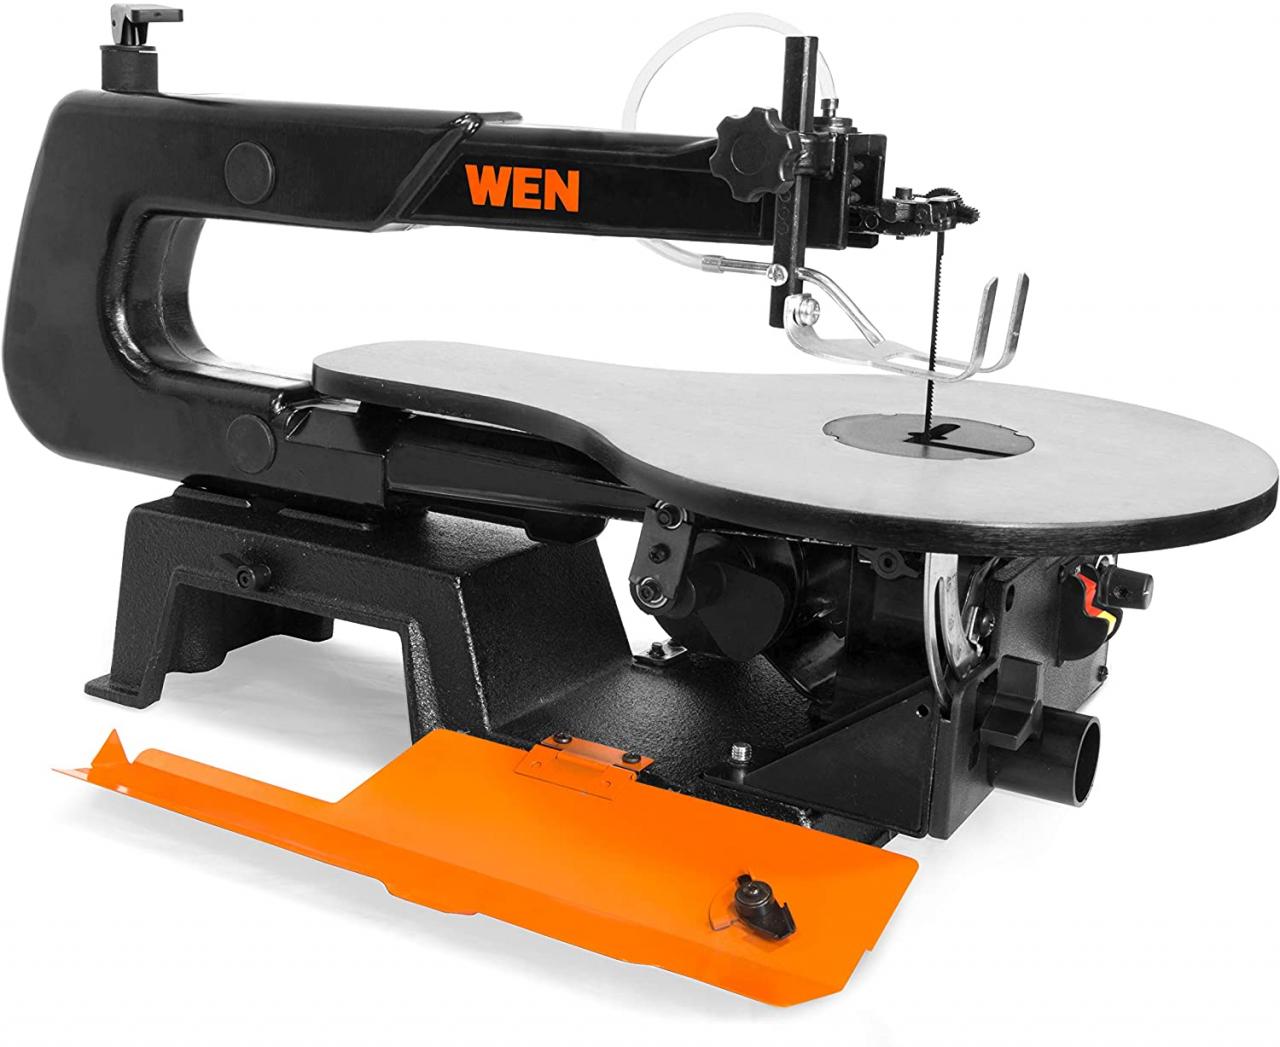 Buy WEN 3922 16-inch Variable Speed Scroll Saw with Easy-Access Blade  Changes Online in Vietnam. B084LKTV6Y